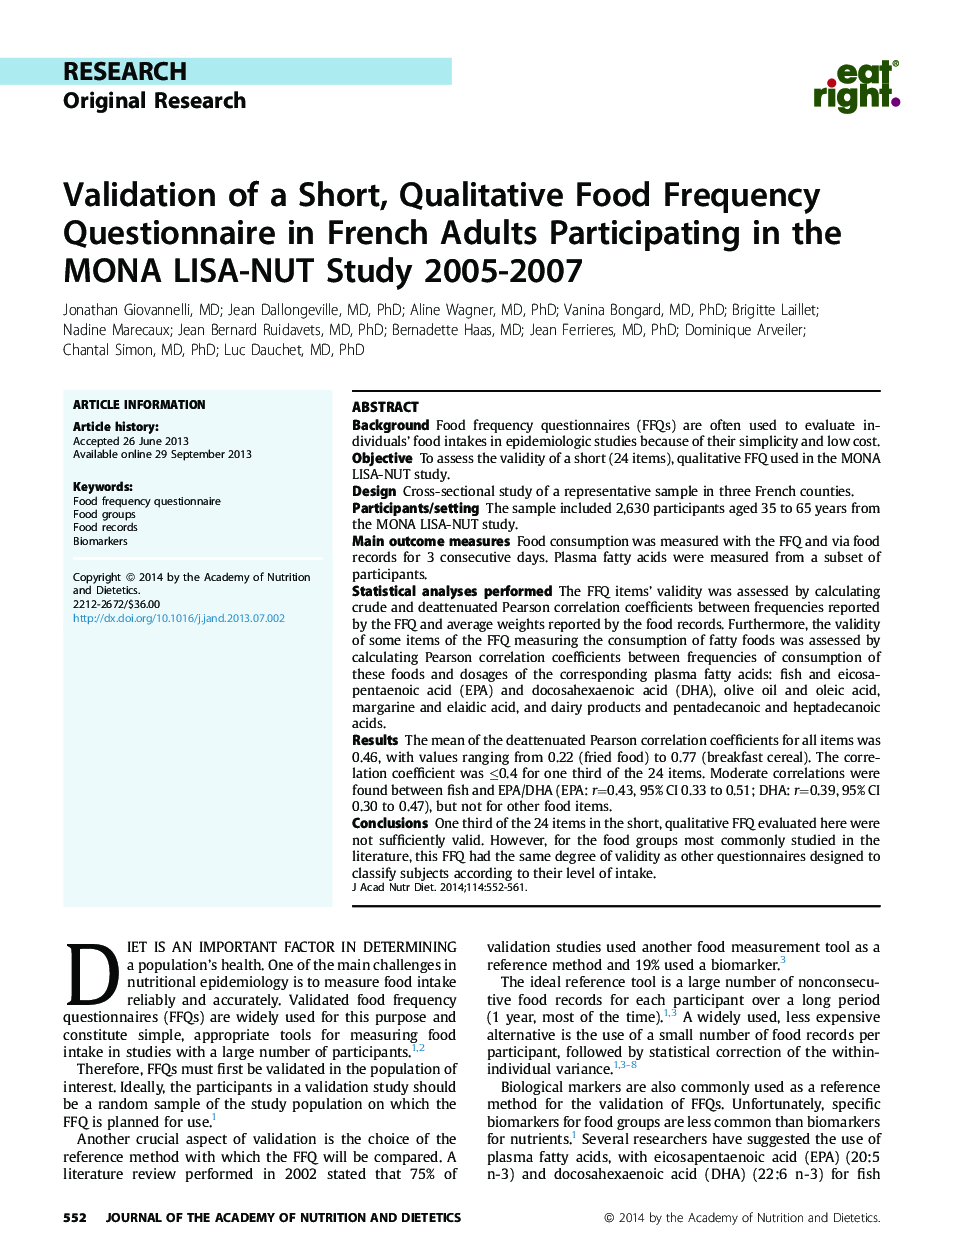 ResearchOriginal ResearchValidation of a Short, Qualitative Food Frequency Questionnaire in French Adults Participating in the MONA LISA-NUT Study 2005-2007